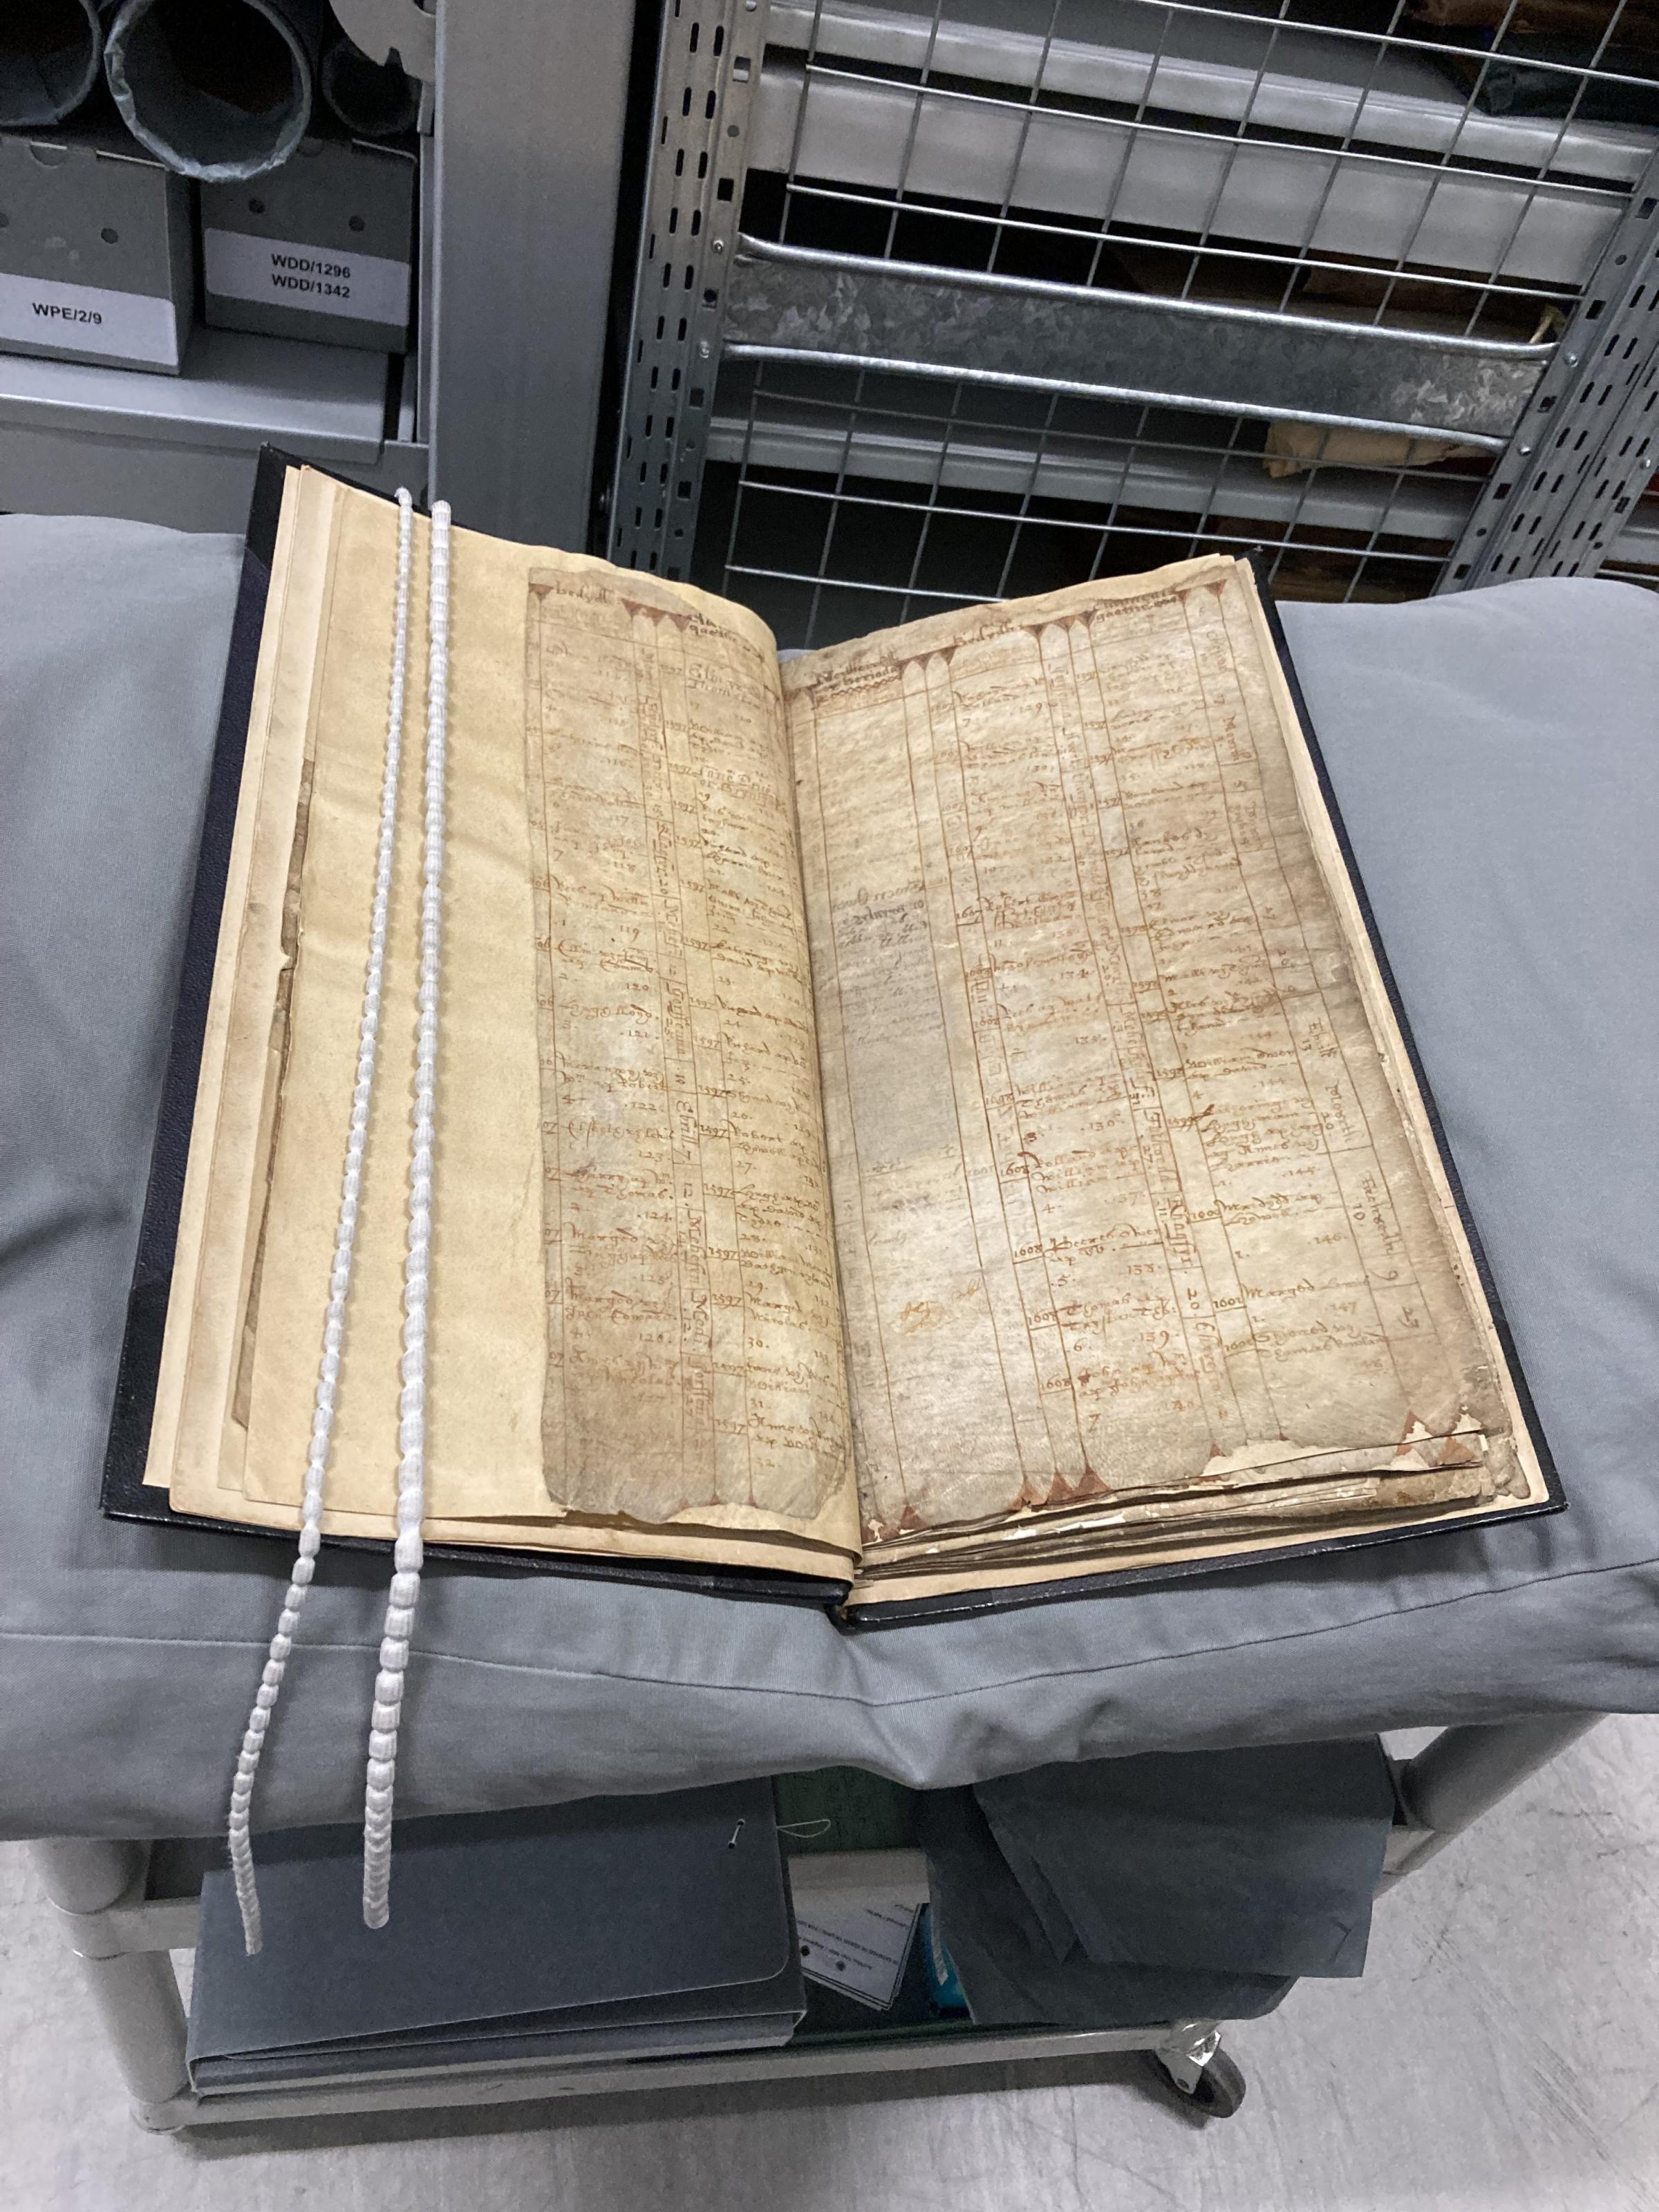 The Penrhoslligwy parish register from 1578 - 1766, which chronicles births, marriages and deaths. The pages are made from animal skin.